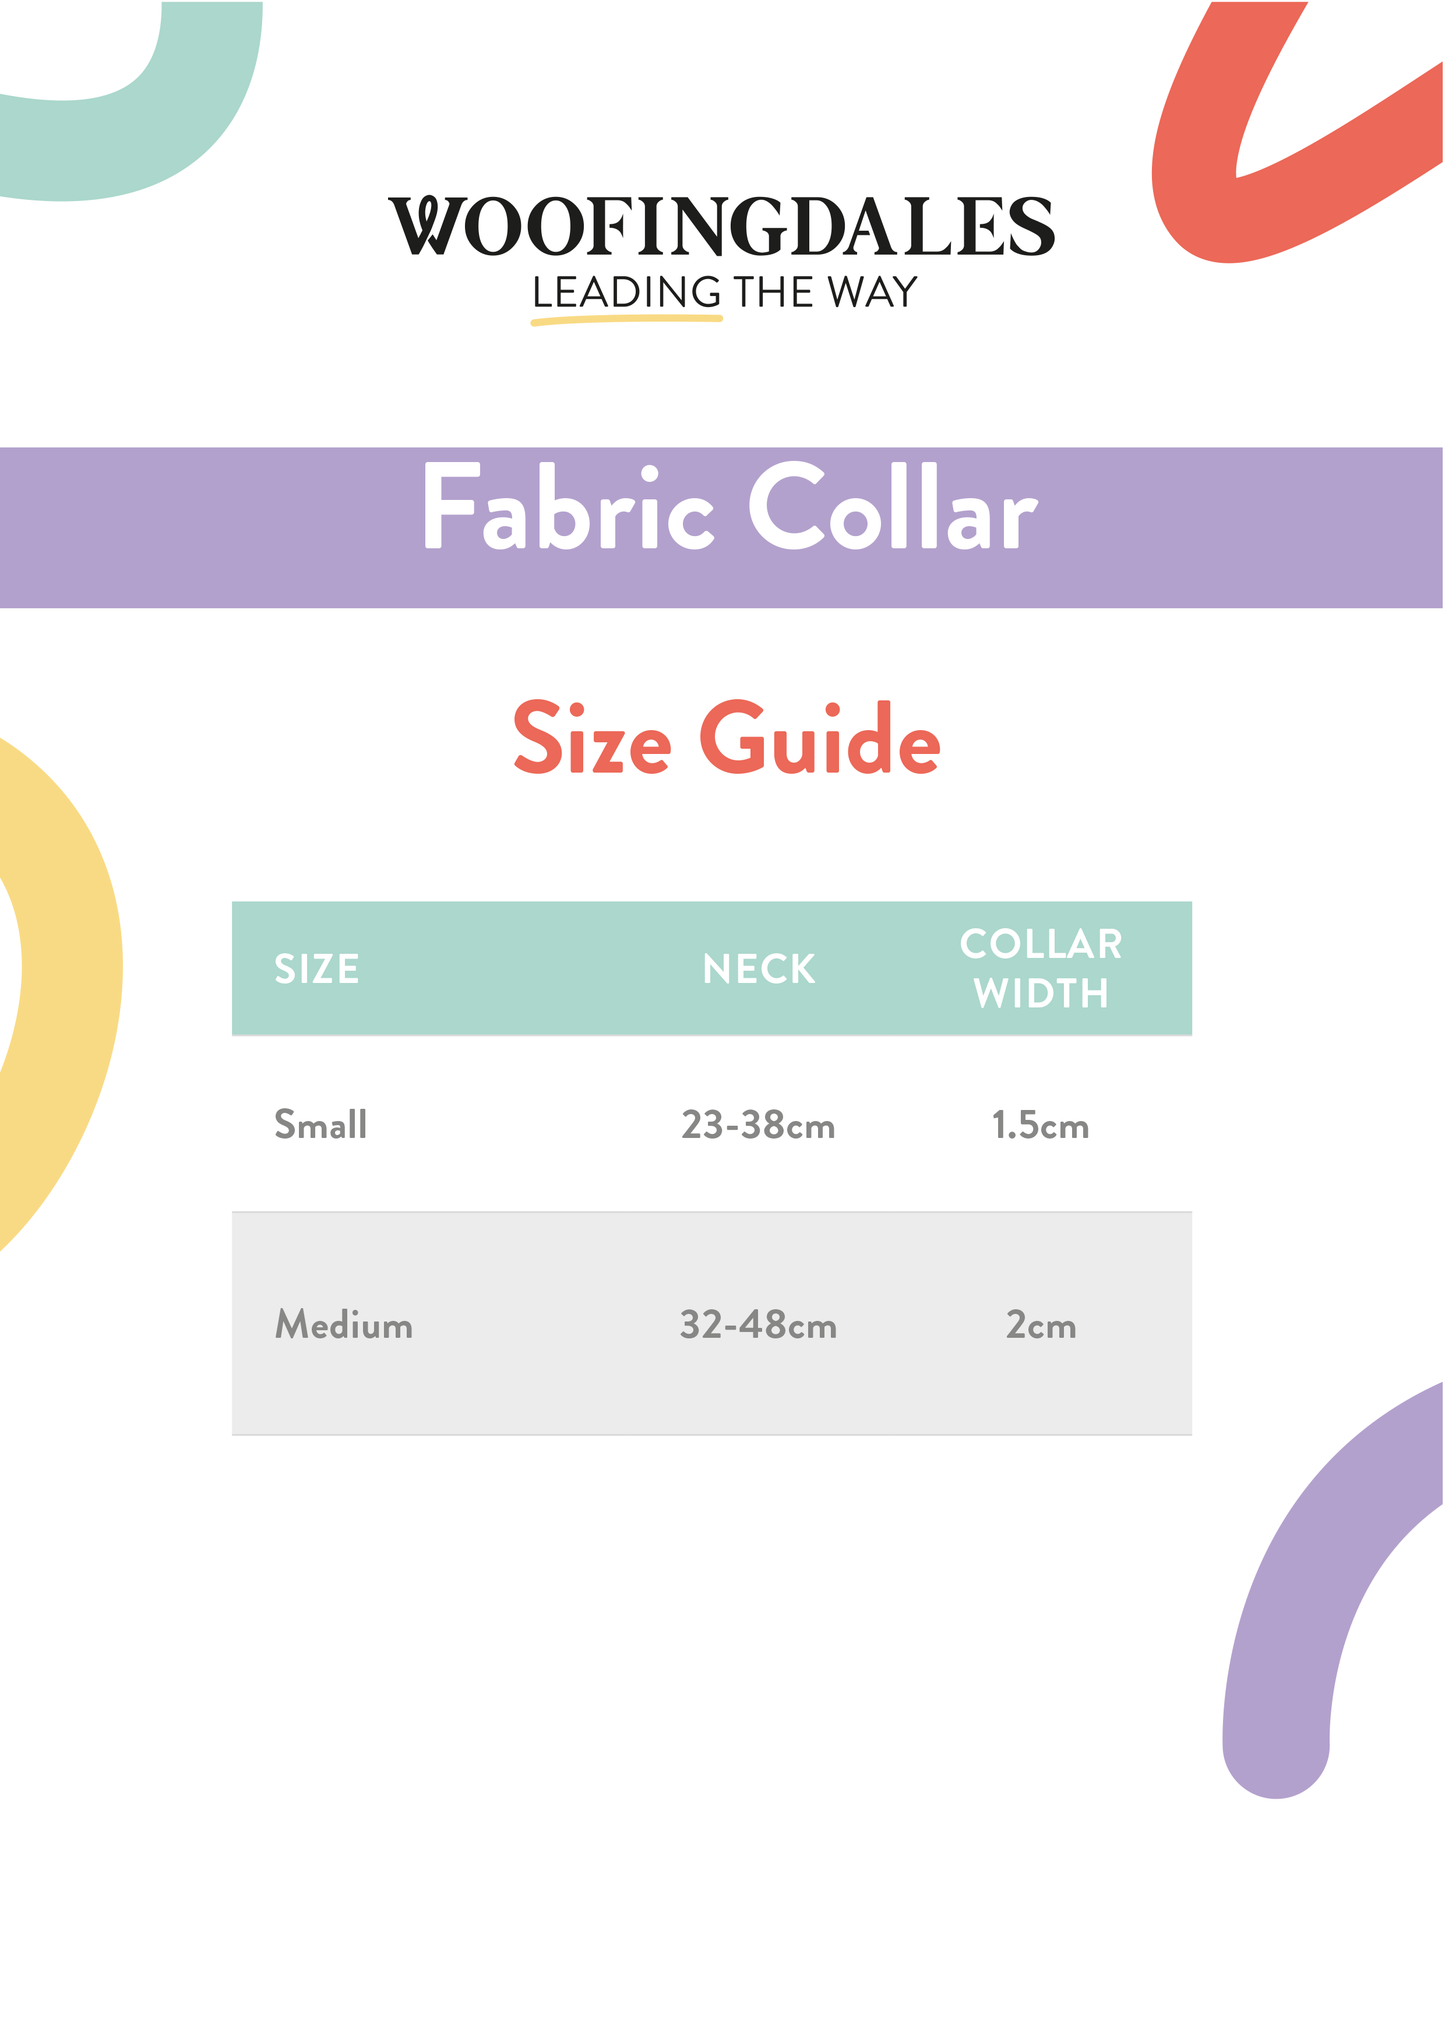 Woofingdales Poster - Size Guide for Fabric Collar